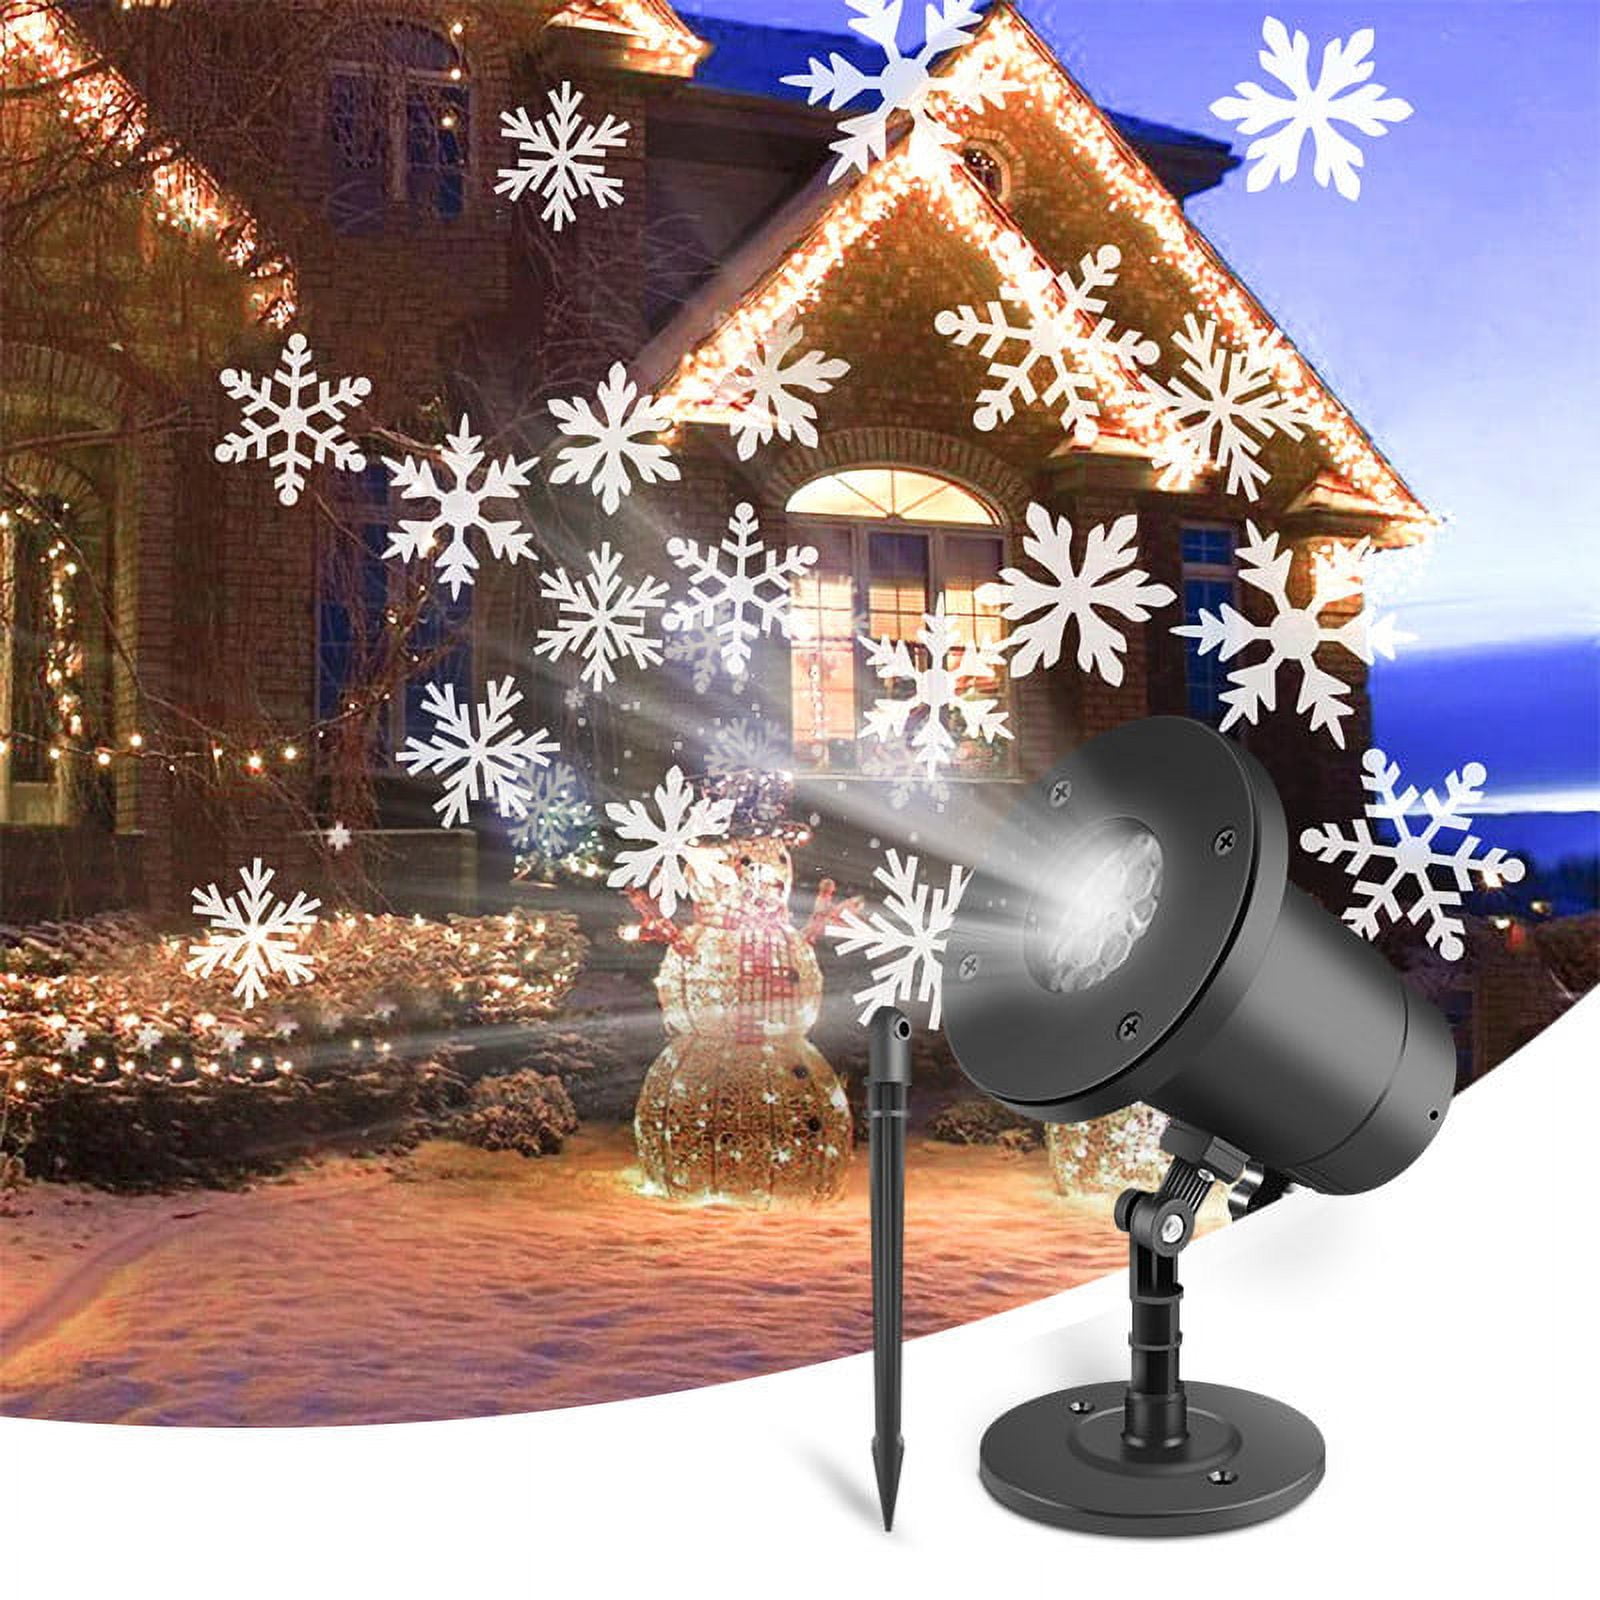 12 Rails + Christmas LED Moving Laser Projector Lamp Light Outdoor, +